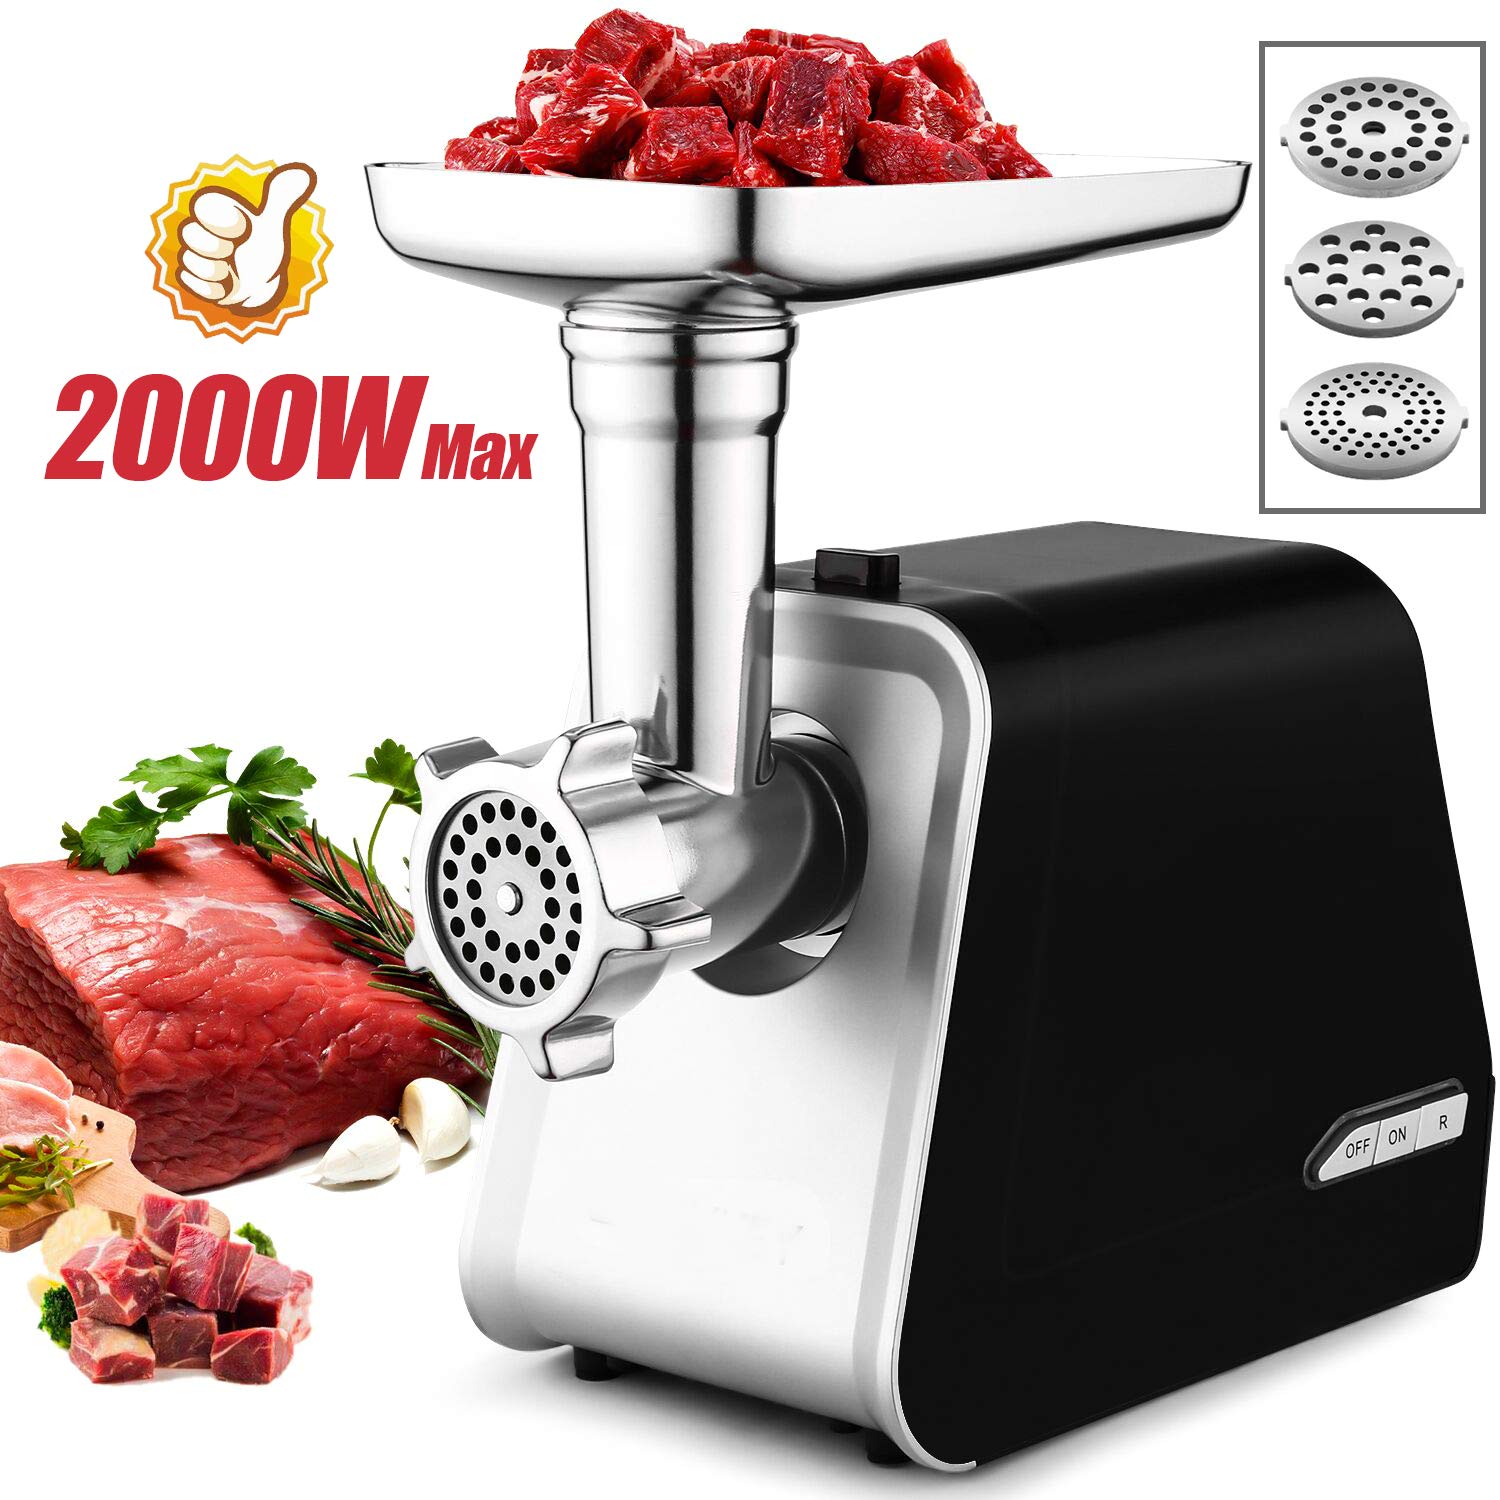 Durable Stainless Steel Food Meat Grinder Attachment For